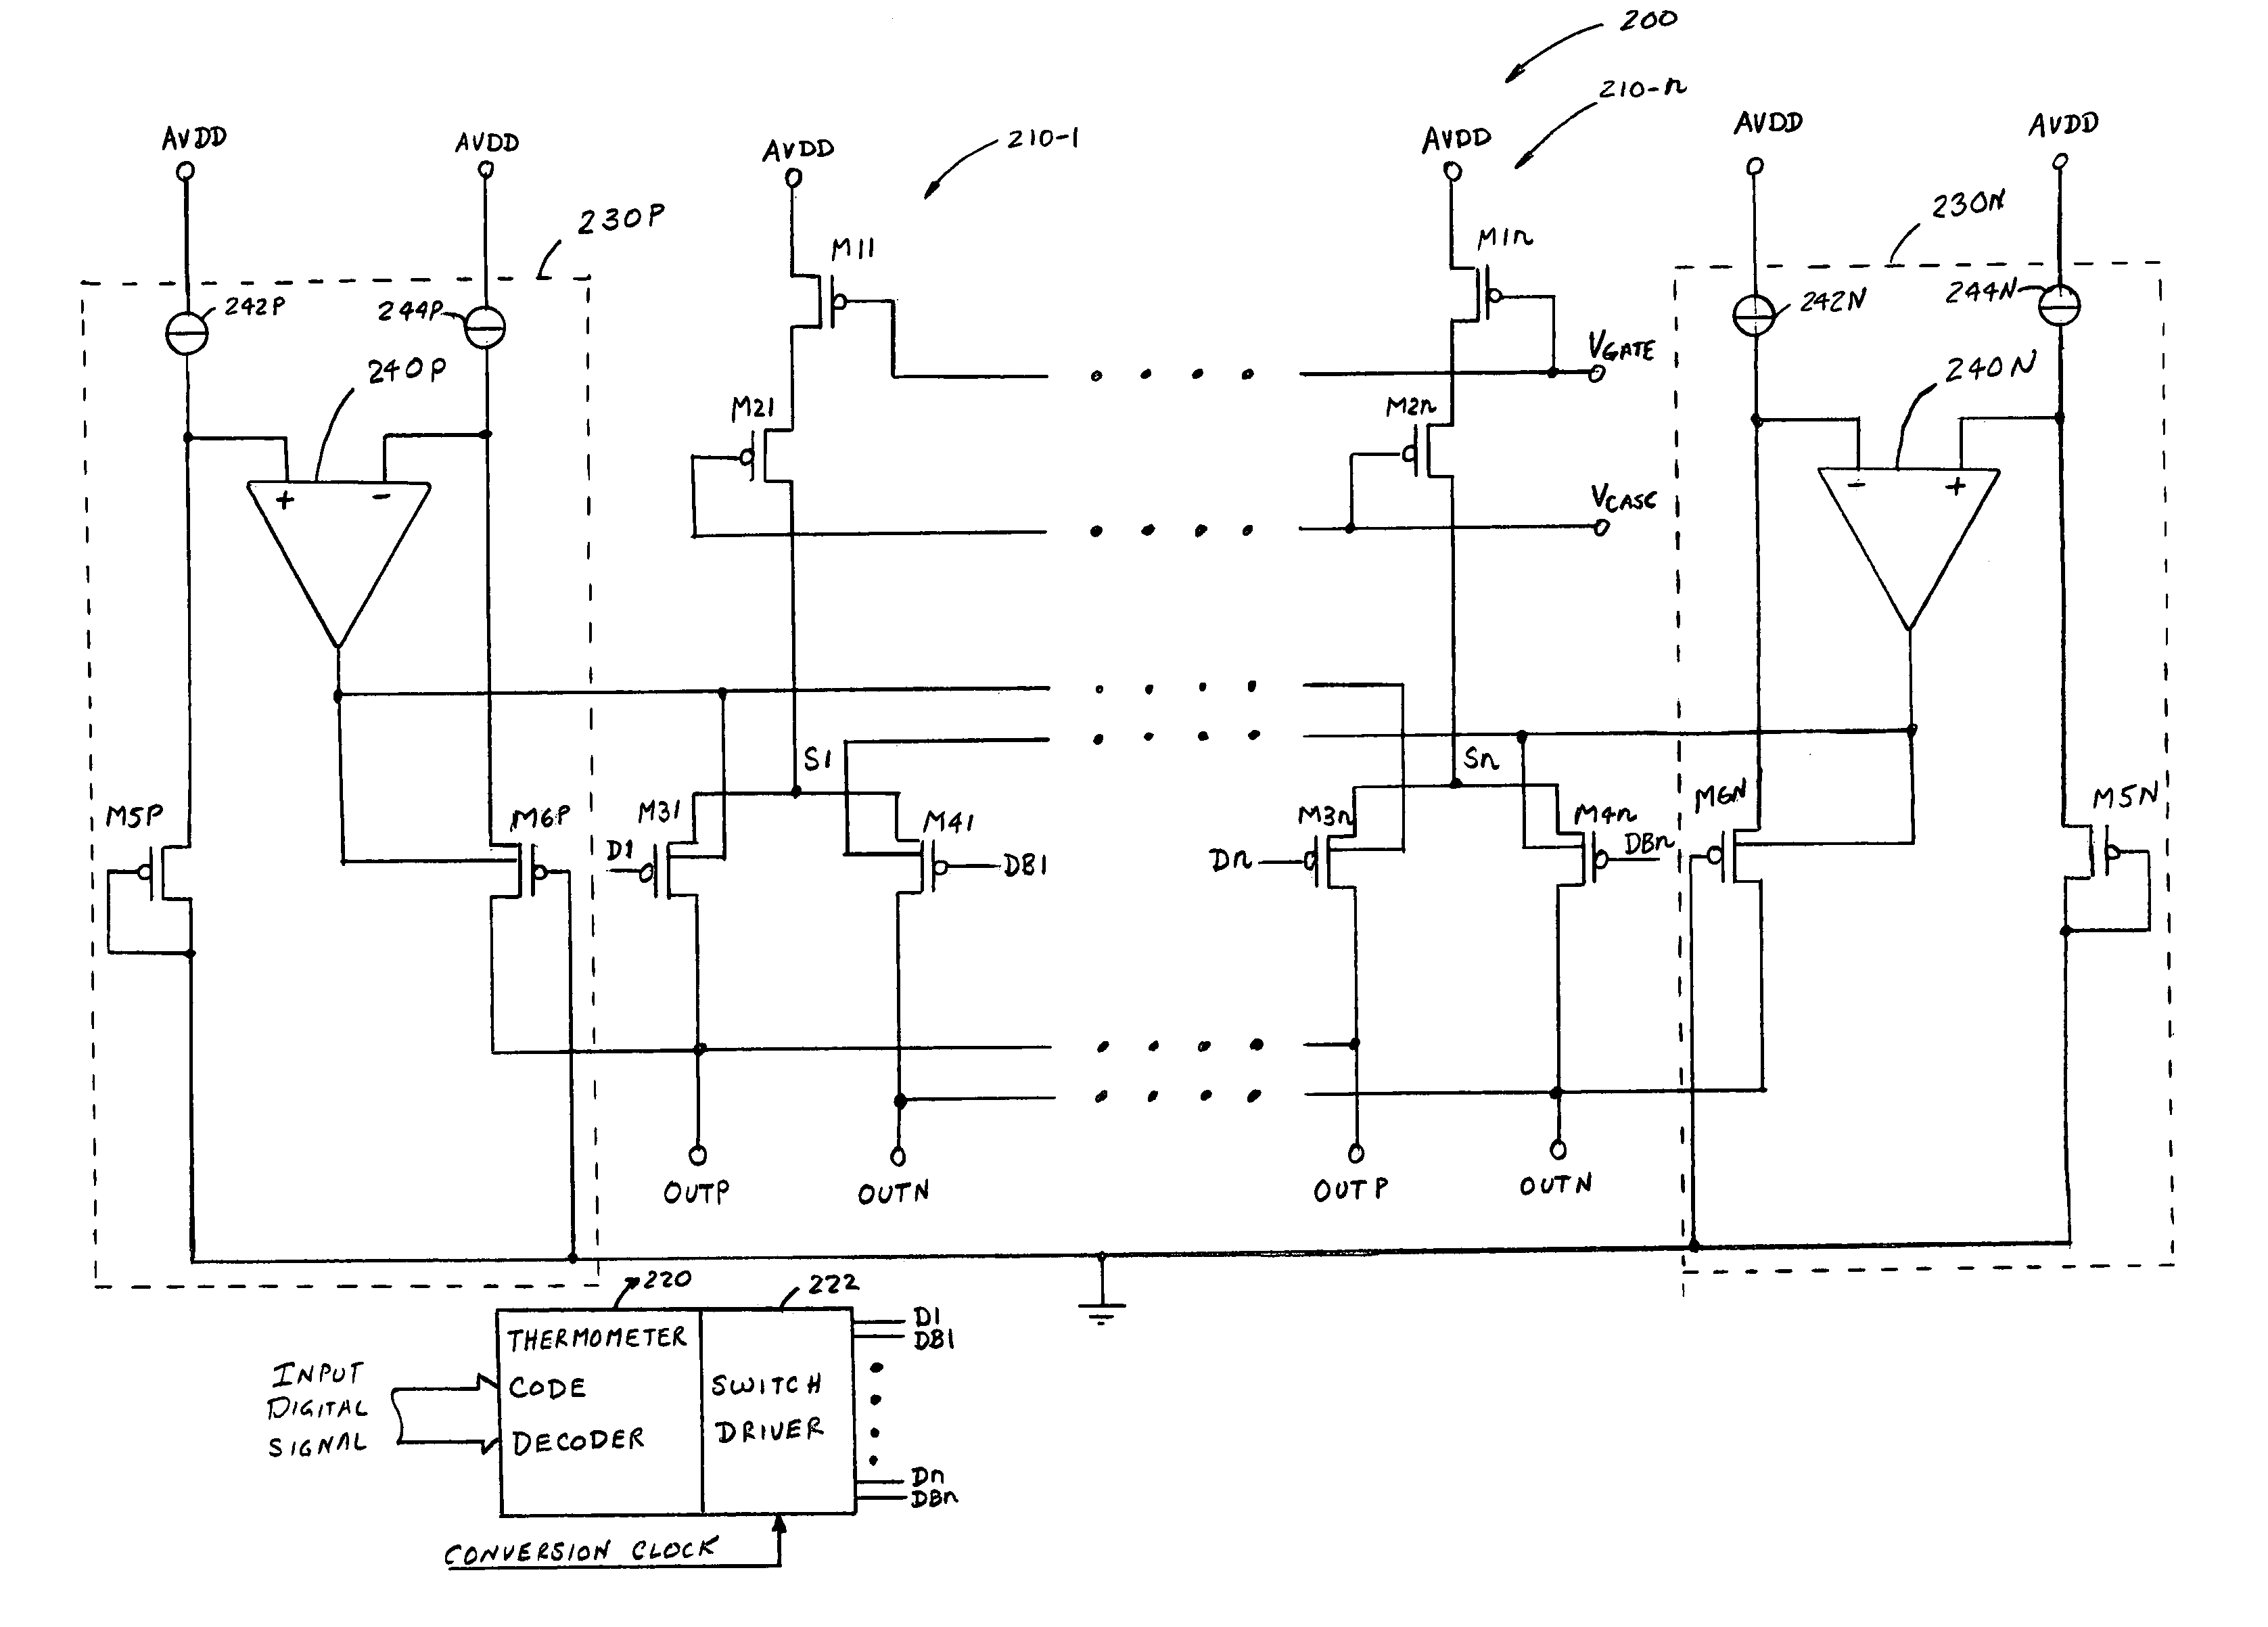 Current steering digital-to-analog (DAC) converter with improved dynamic performance